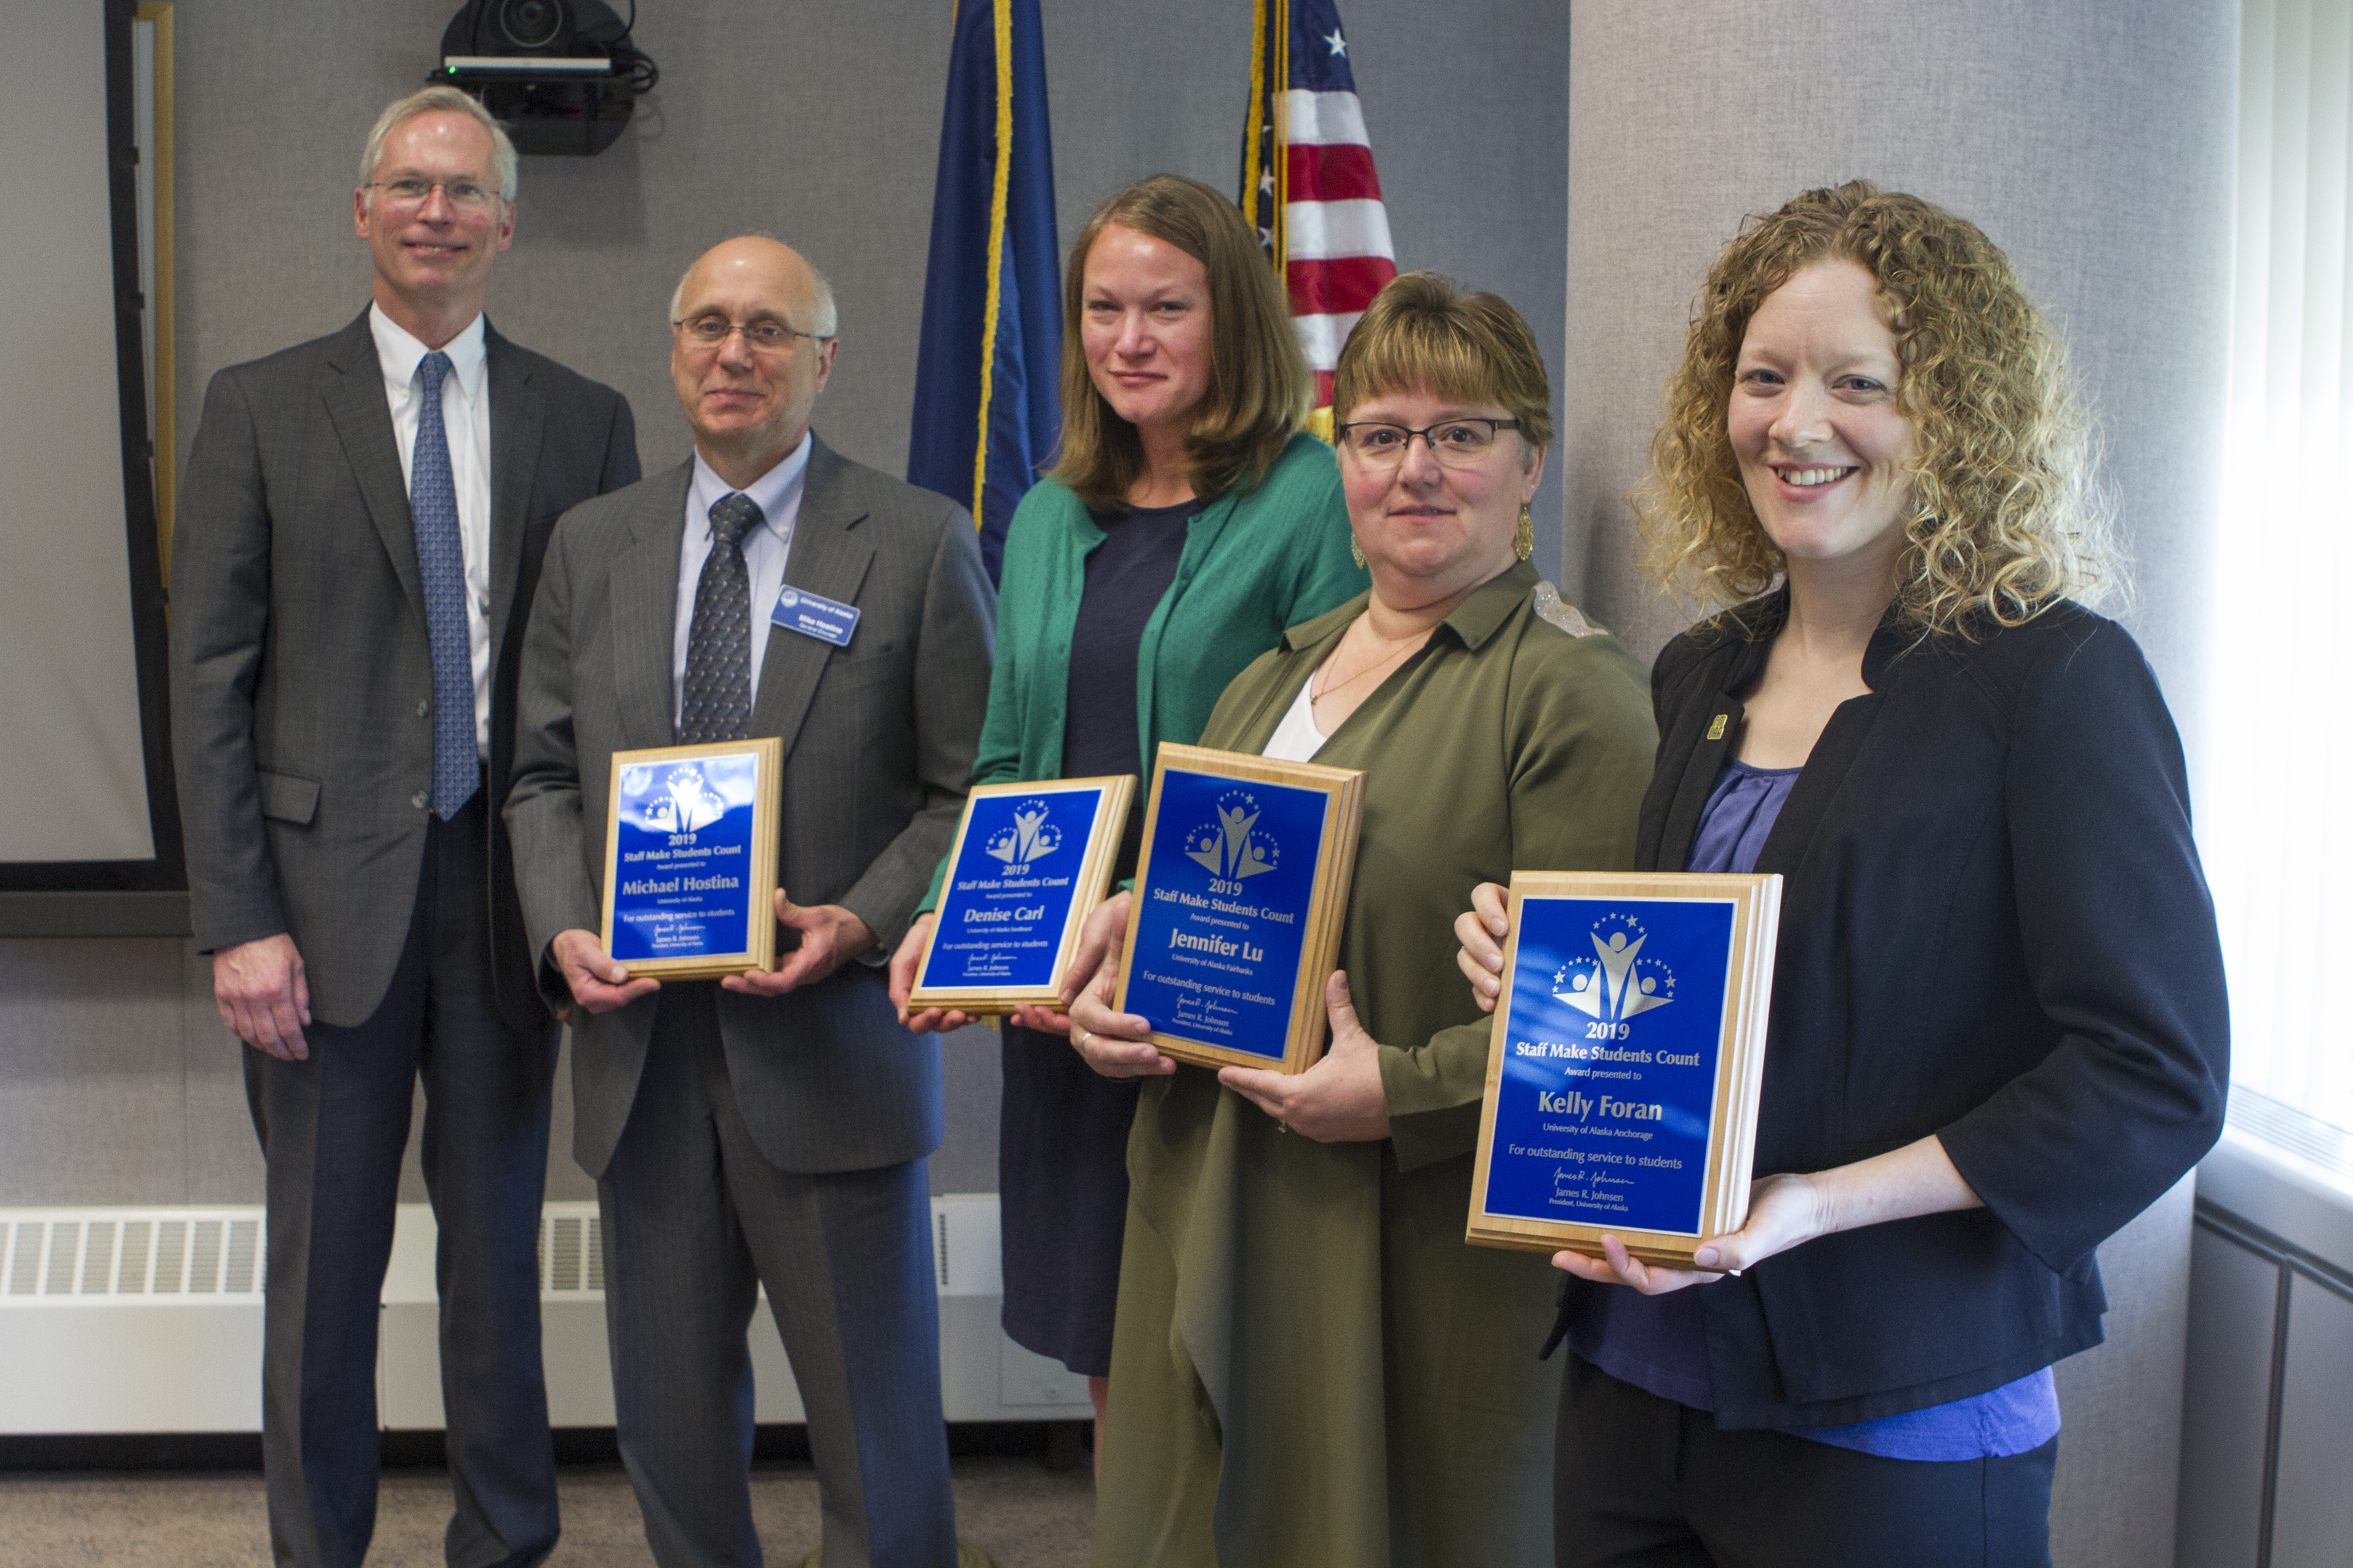 2019 Staff Make Students Count Awardees